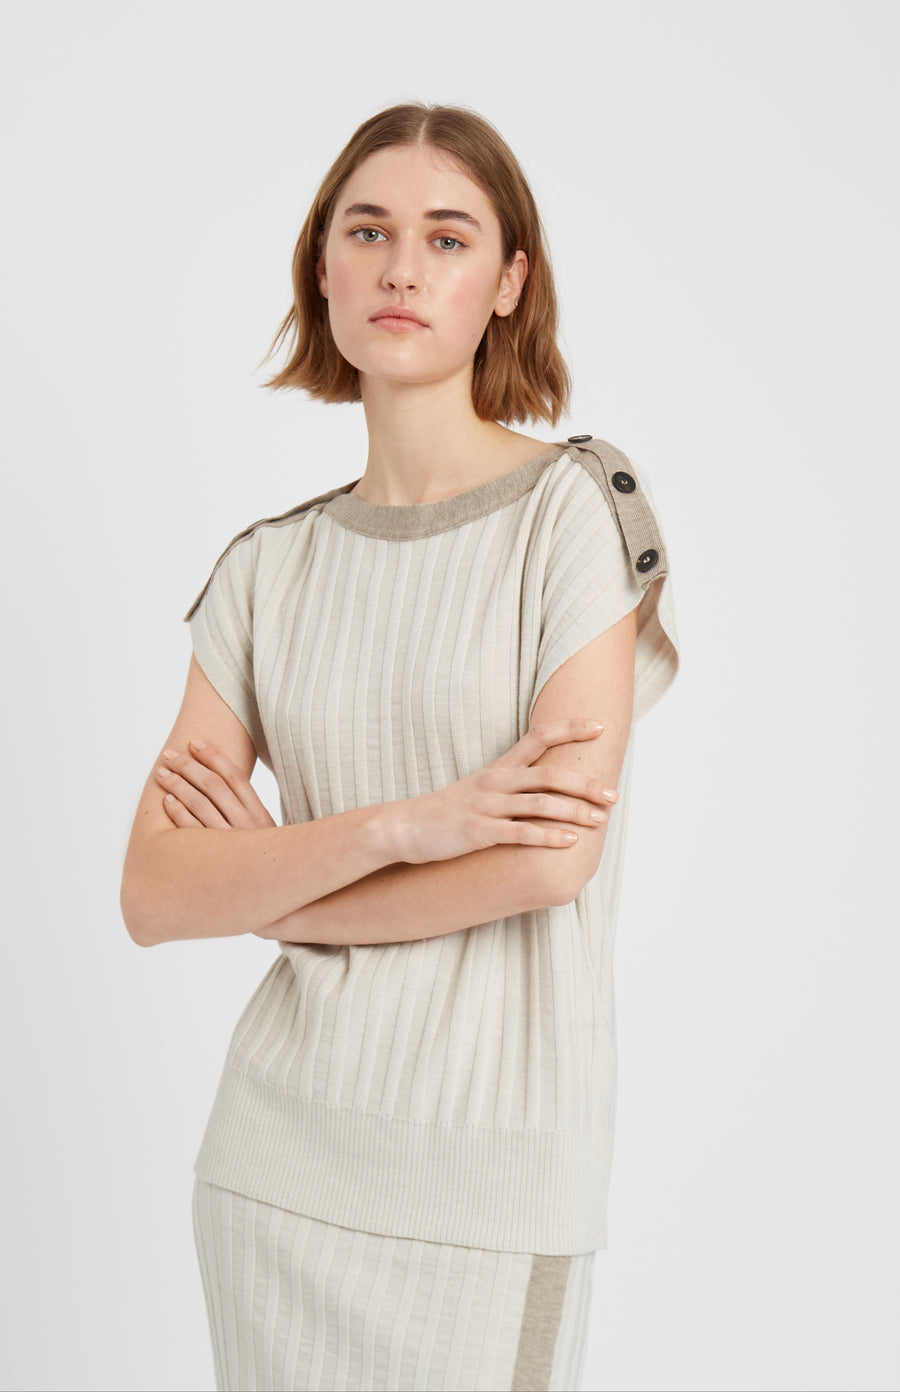 Pringle of Scotland Sleeveless Merino Jumper with Broad Rib in Natural showing neck detail